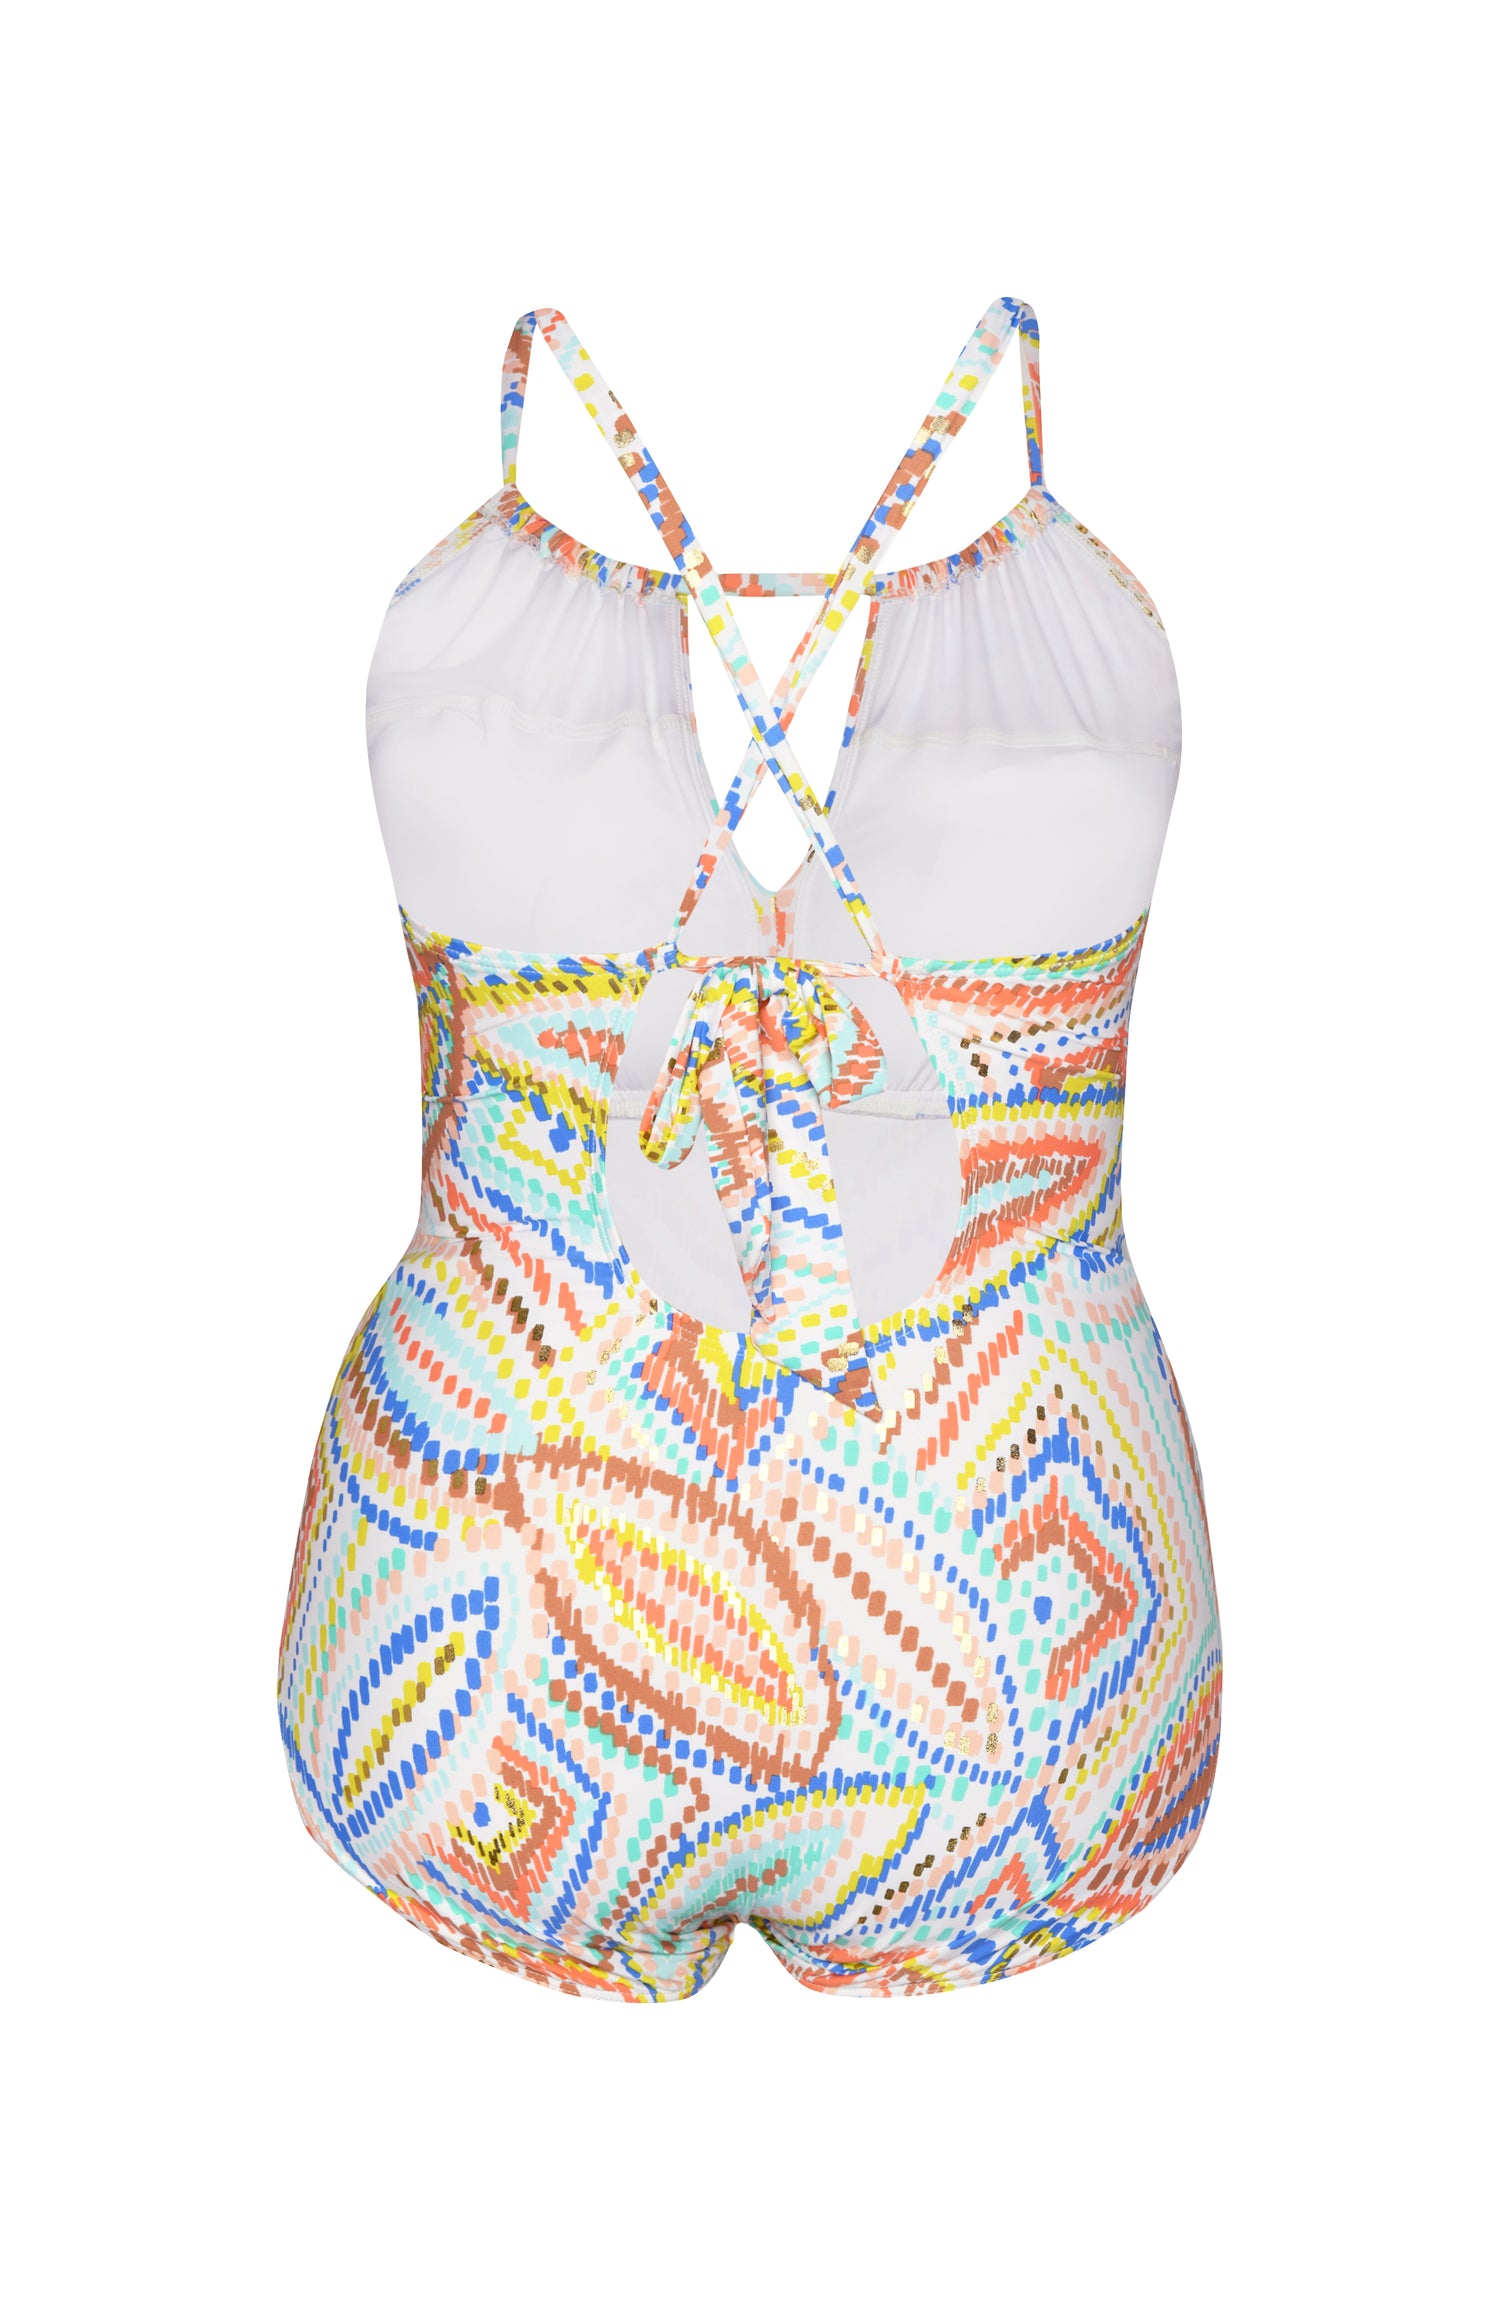 Geometric patterned one piece swimsuit in pastel shades of pink, blue, and yellow, accented with sporadic glimmers of gold sequin-like details on a white background.